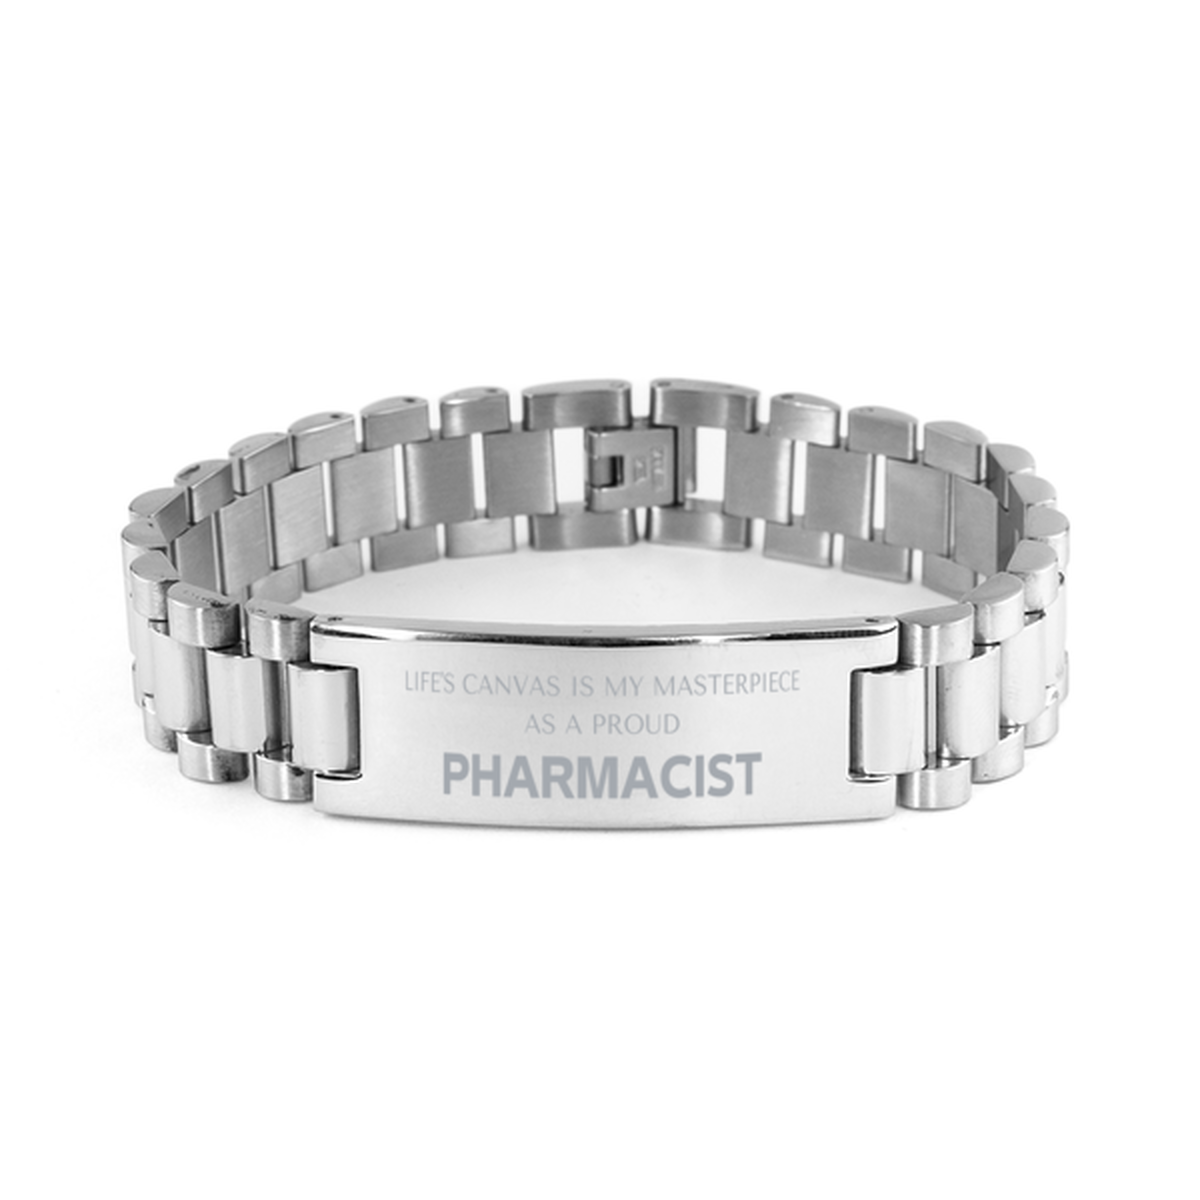 Proud Pharmacist Gifts, Life's canvas is my masterpiece, Epic Birthday Christmas Unique Ladder Stainless Steel Bracelet For Pharmacist, Coworkers, Men, Women, Friends